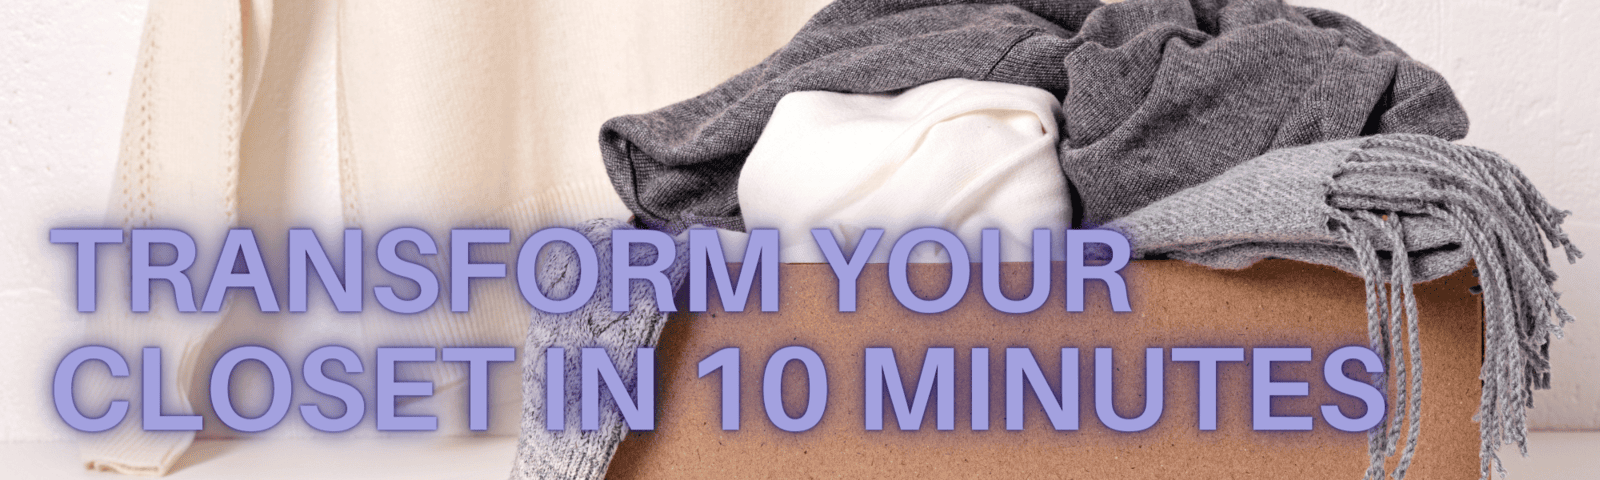 Transform your Closet in 10 Minutes (at a time)